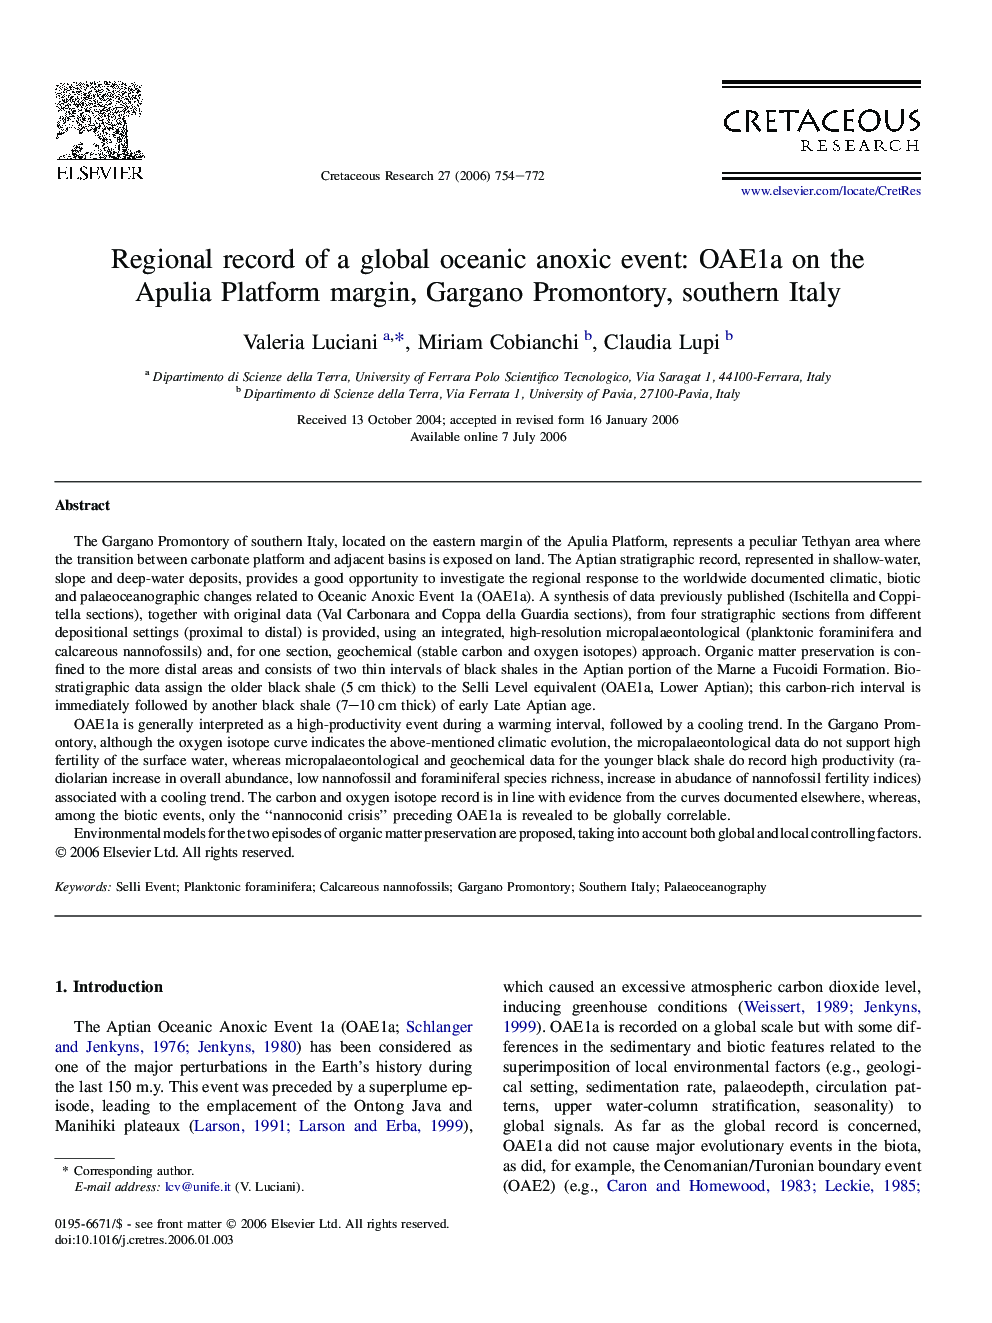 Regional record of a global oceanic anoxic event: OAE1a on the Apulia Platform margin, Gargano Promontory, southern Italy